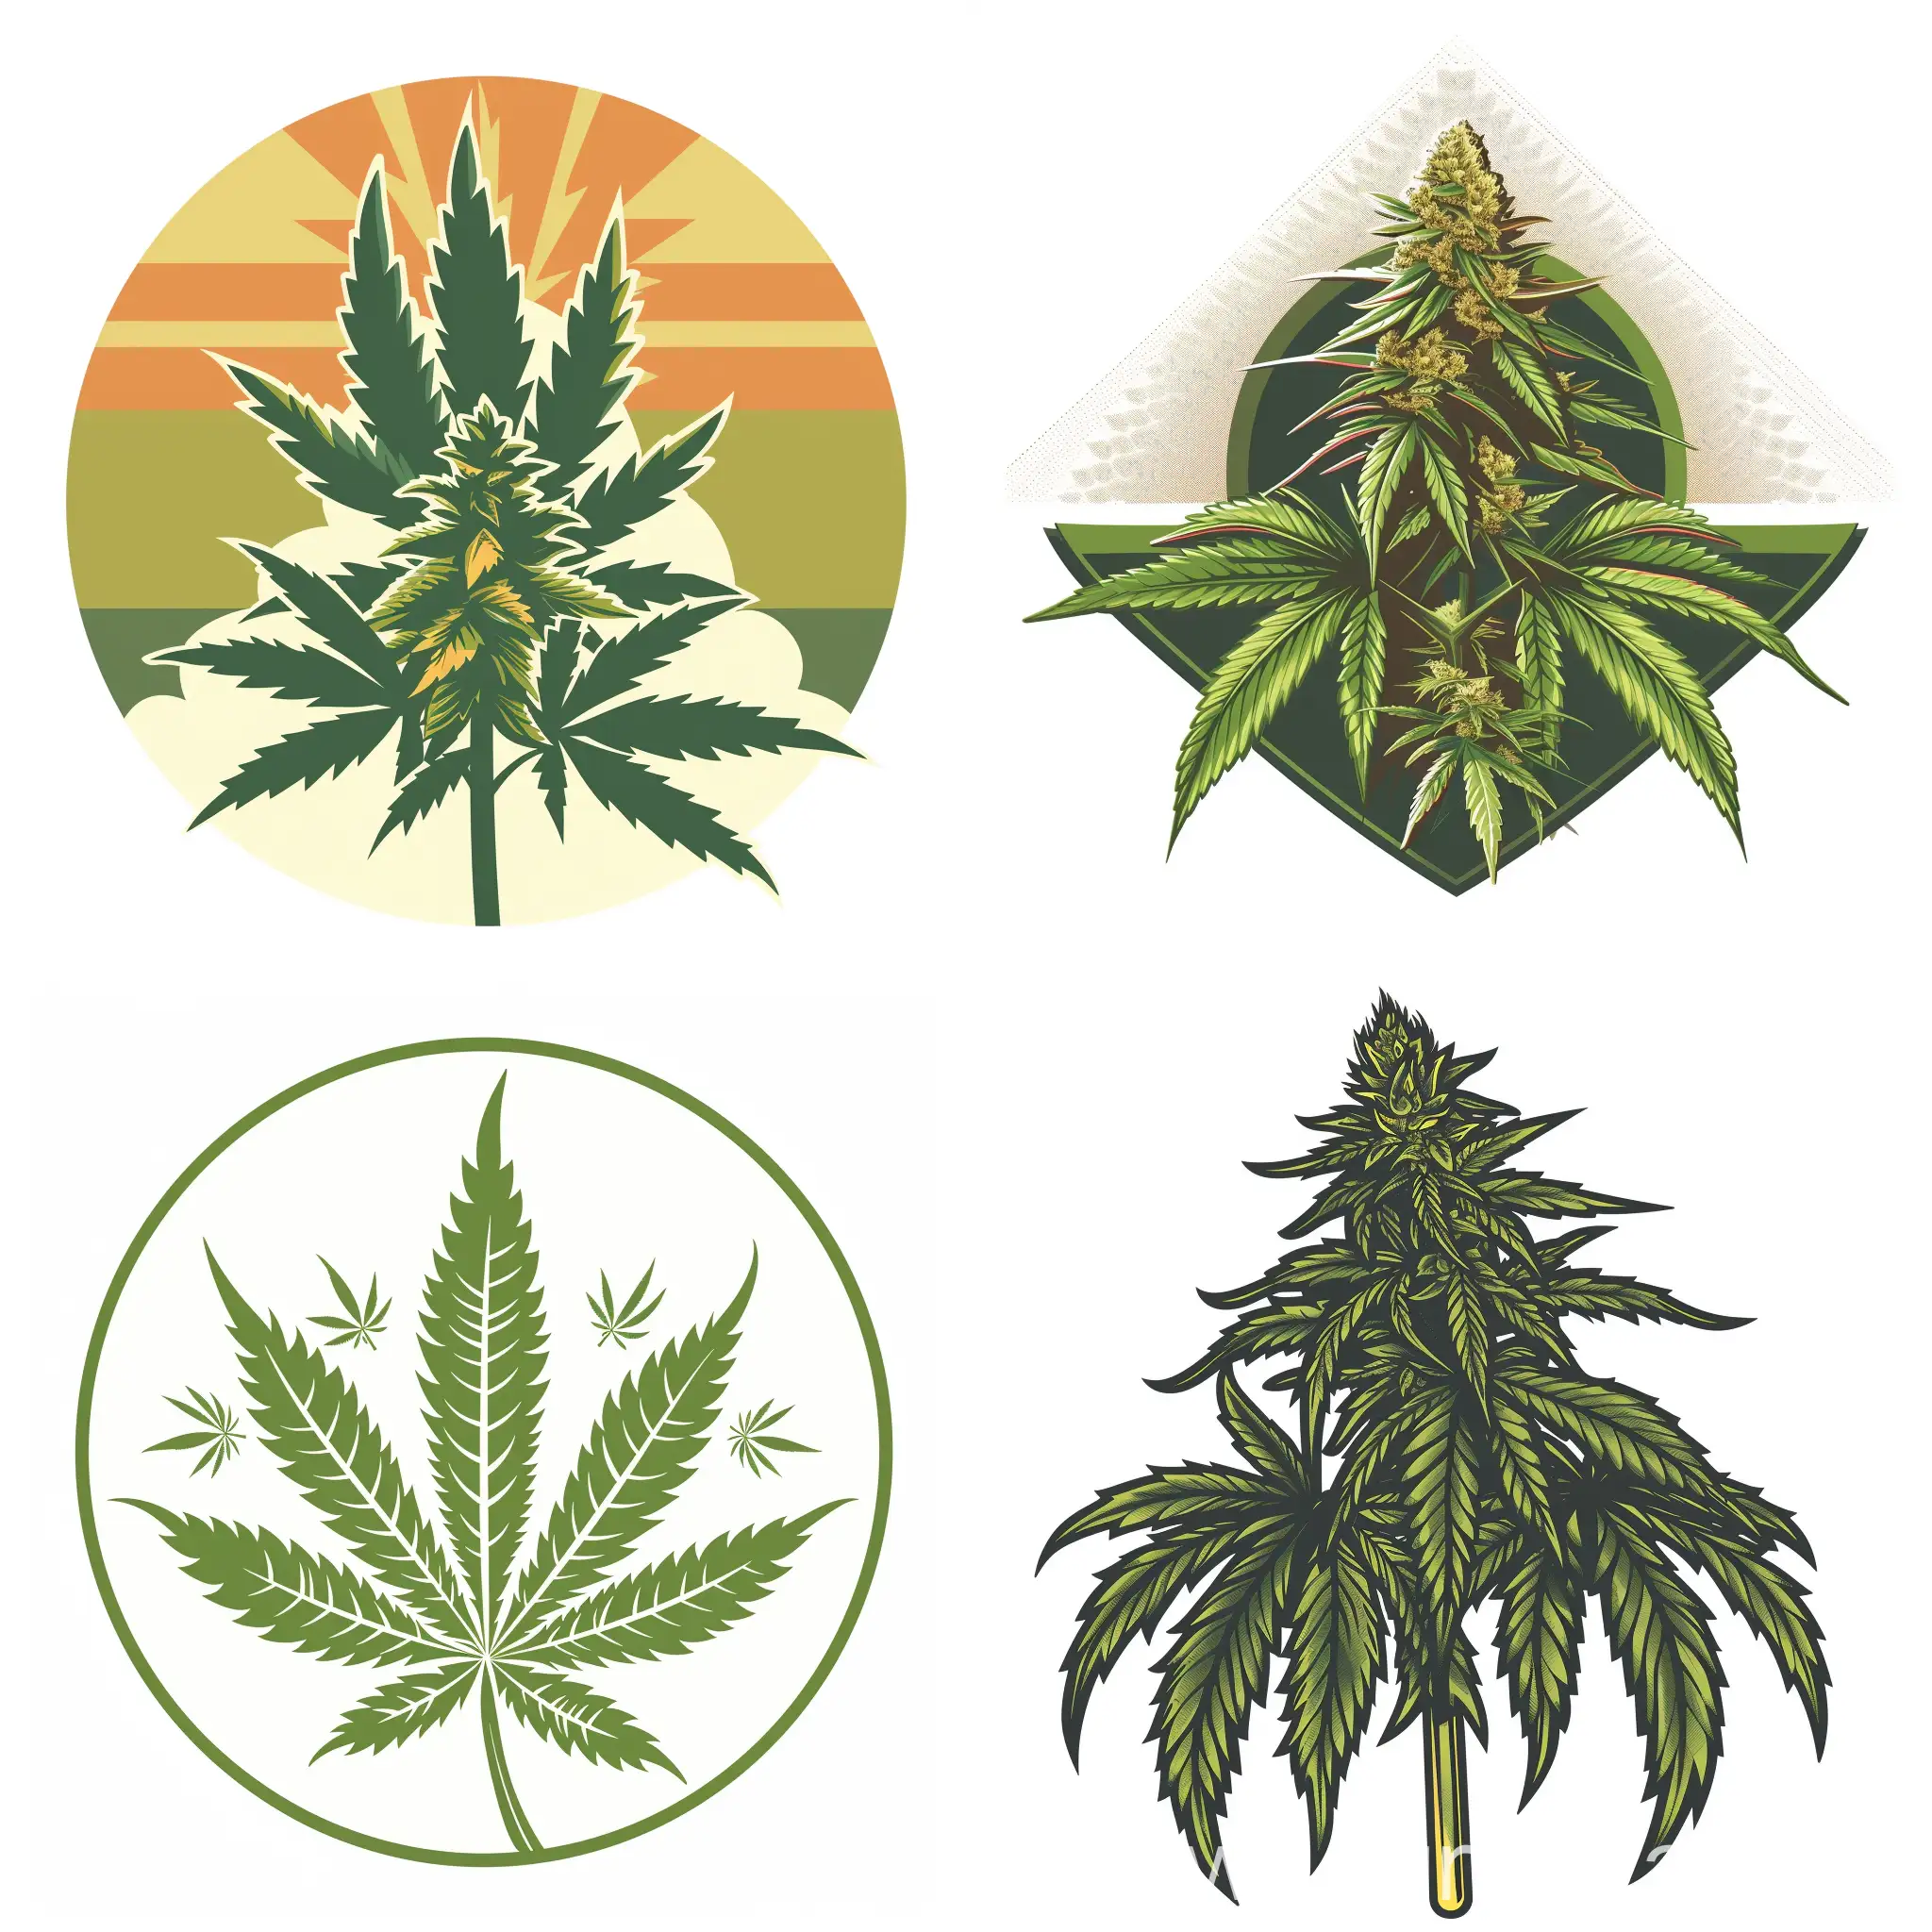 Logo design of marijuana plant but i want it to be old 80s theme with a white background, but make it look real sleek and noticeable